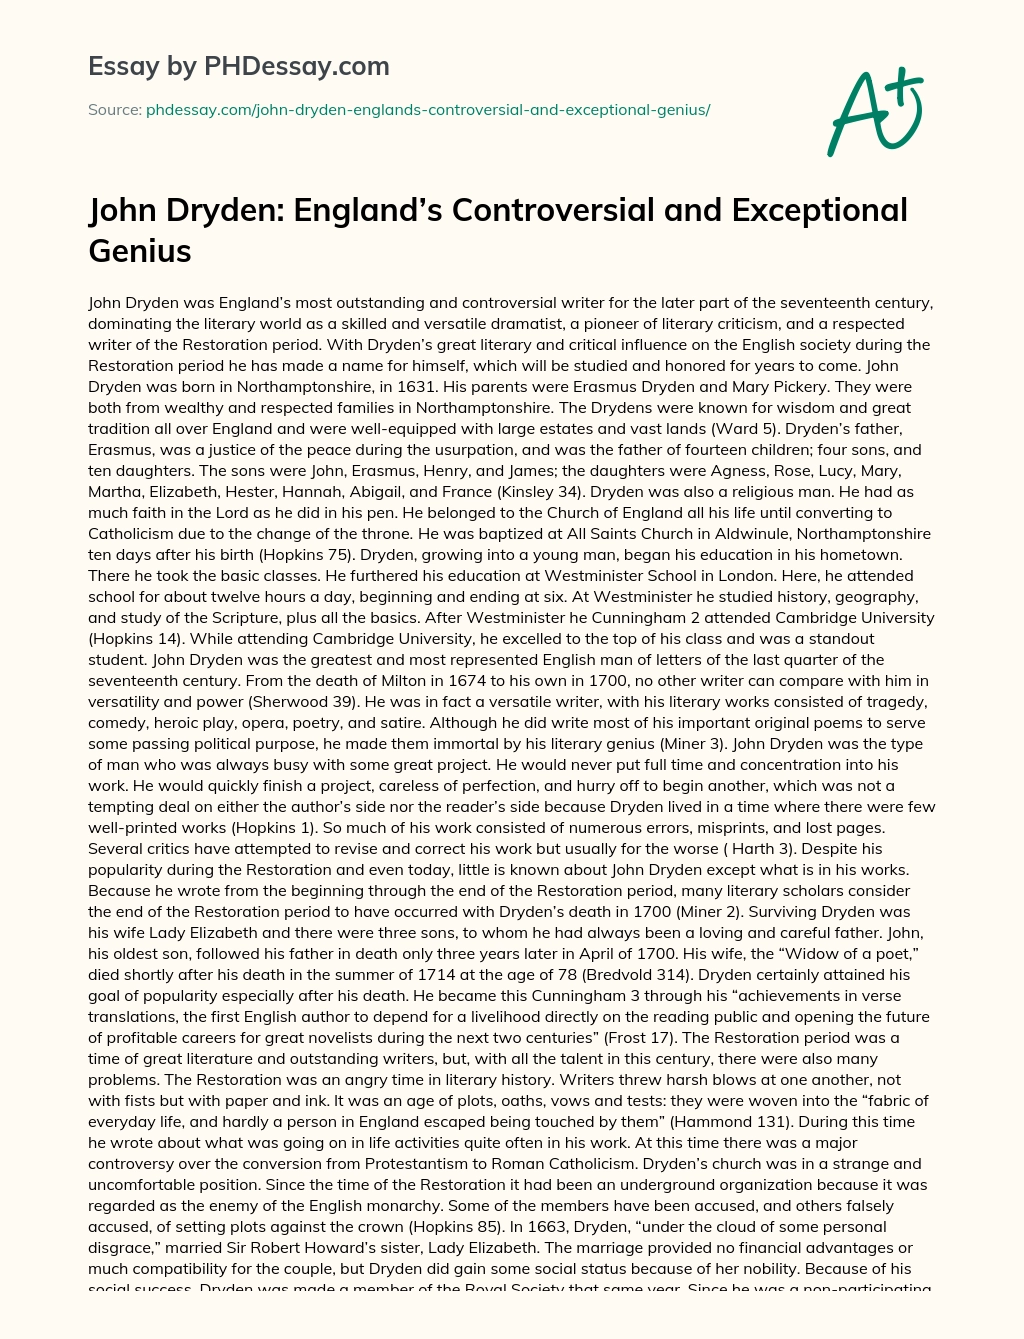 John Dryden: England’s Controversial and Exceptional Genius